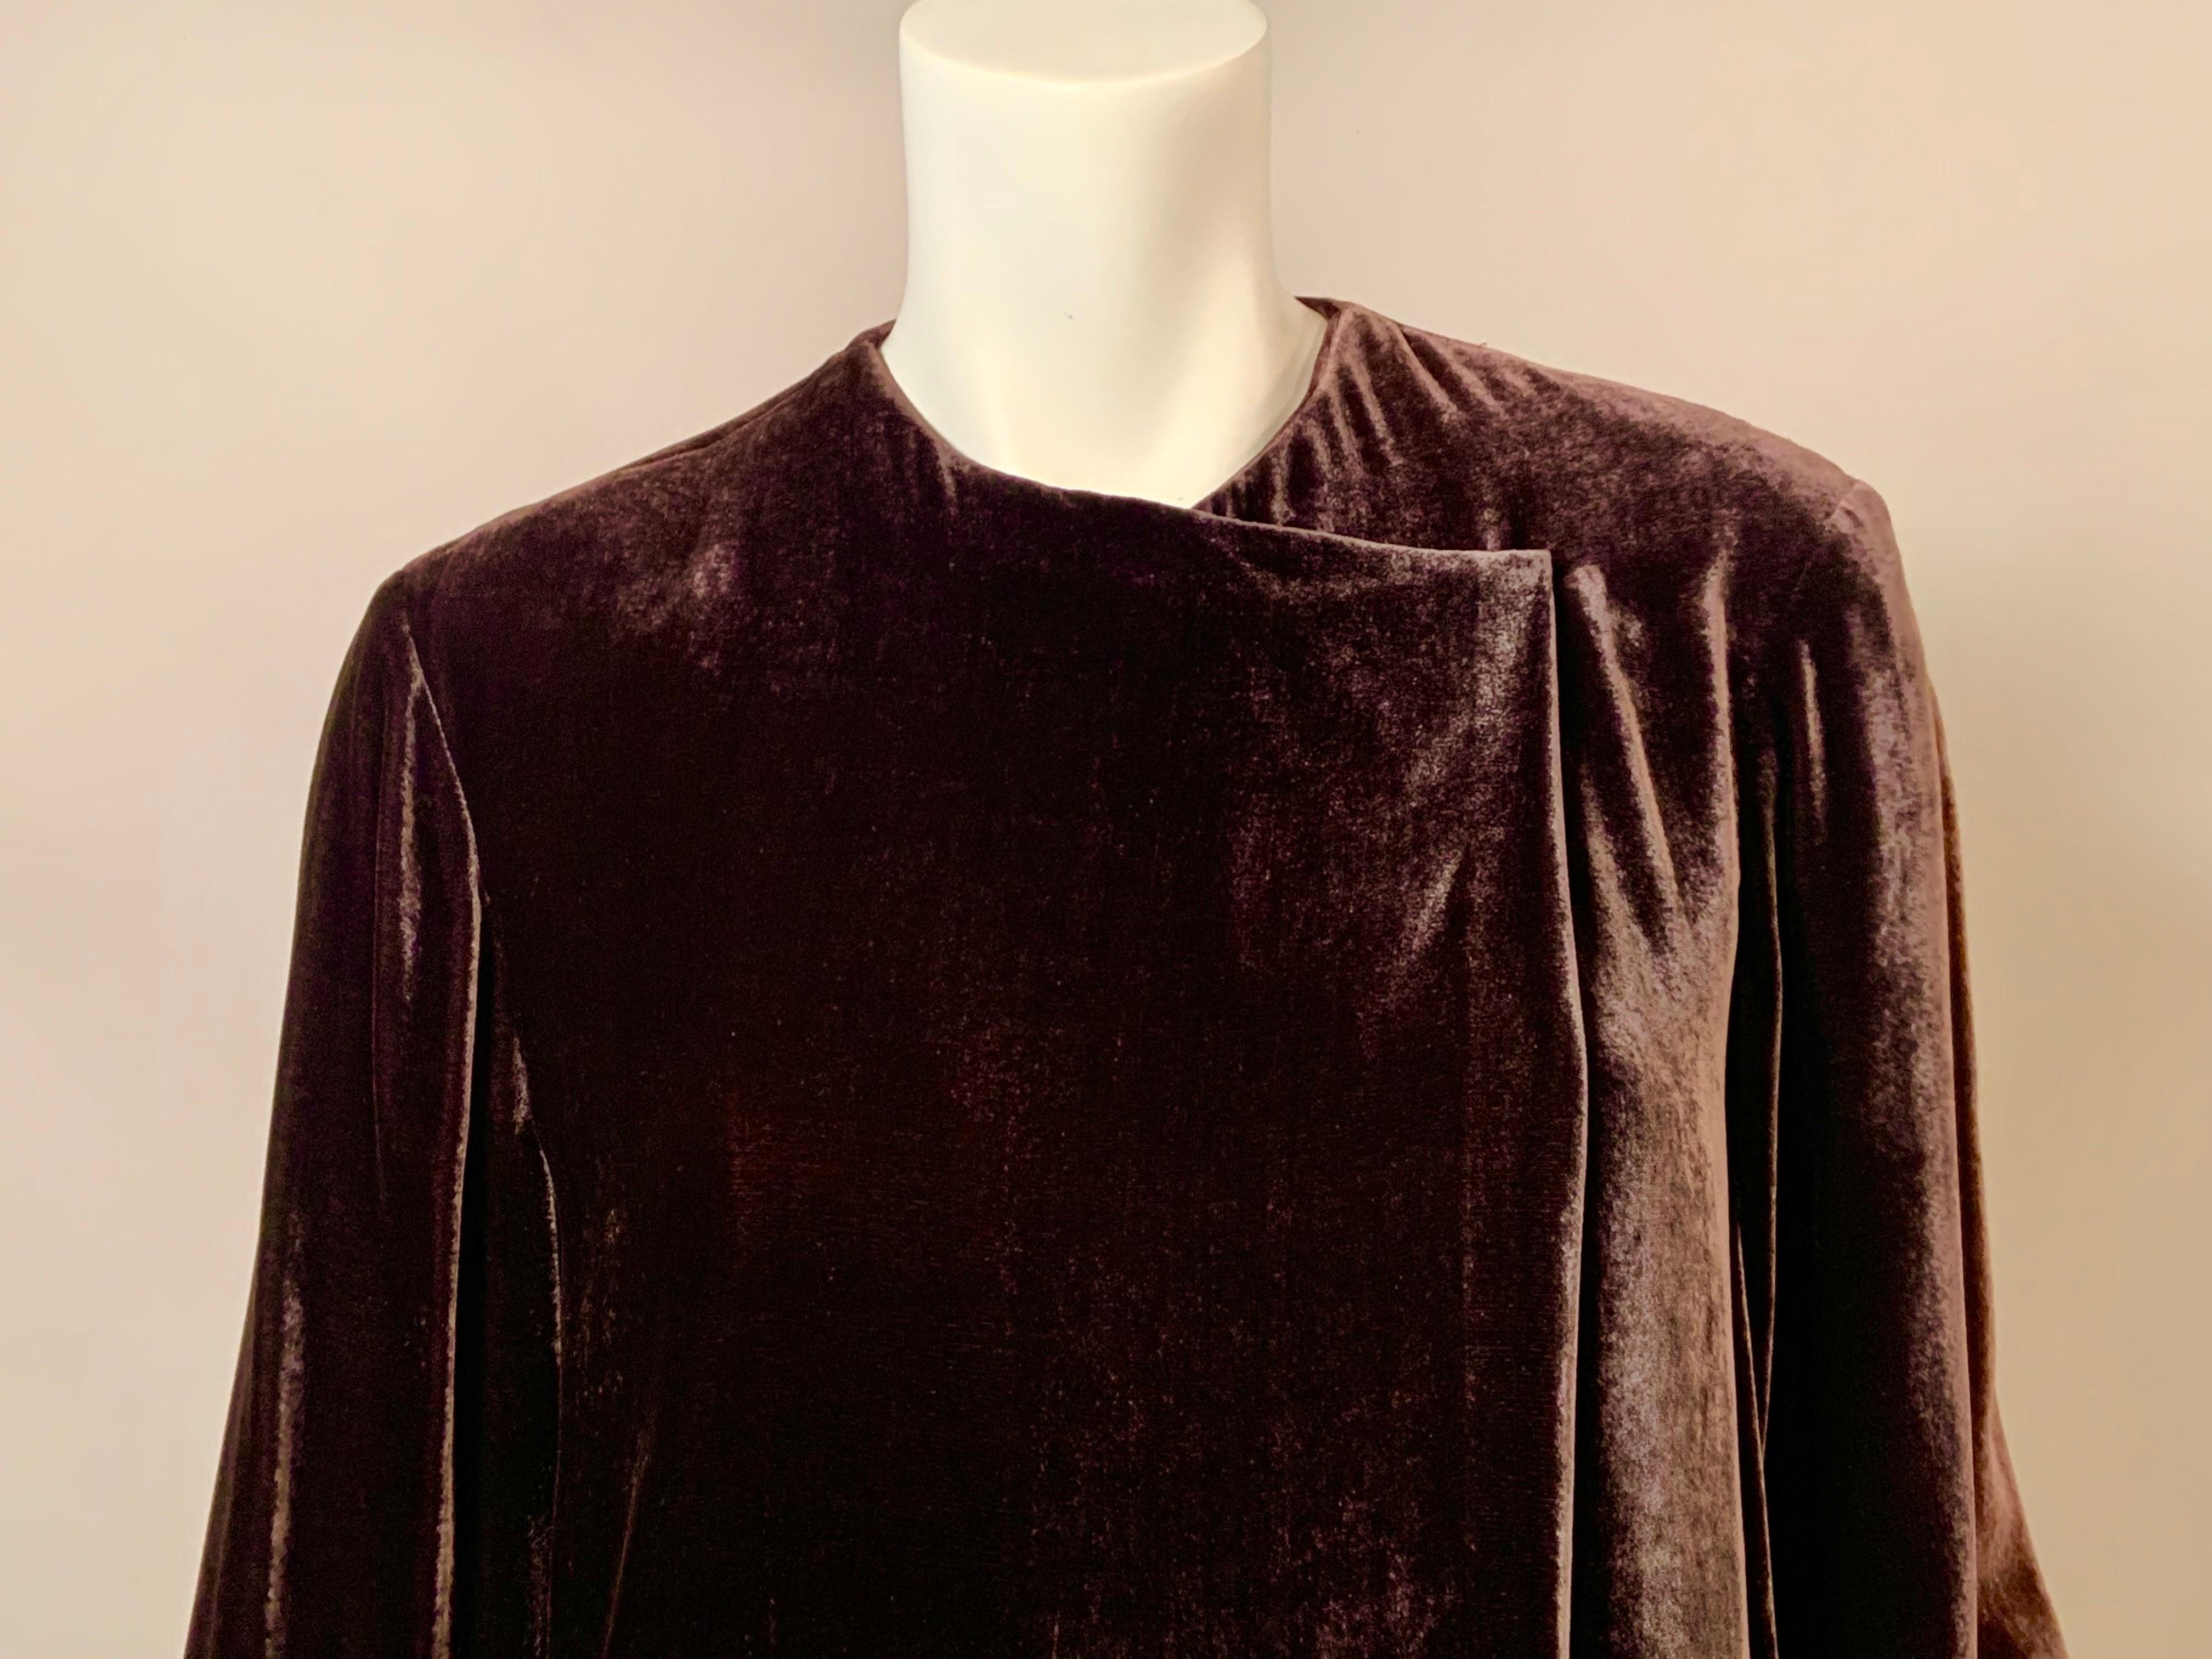 This spare, elegant and lustrous brown velvet coat from Donna Karan can be worn as a coat, a tunic over pants or belted as a dress.  It has two hooks for closure, as well as the optional belt.  It has two pockets hidden in the side seams, and it is